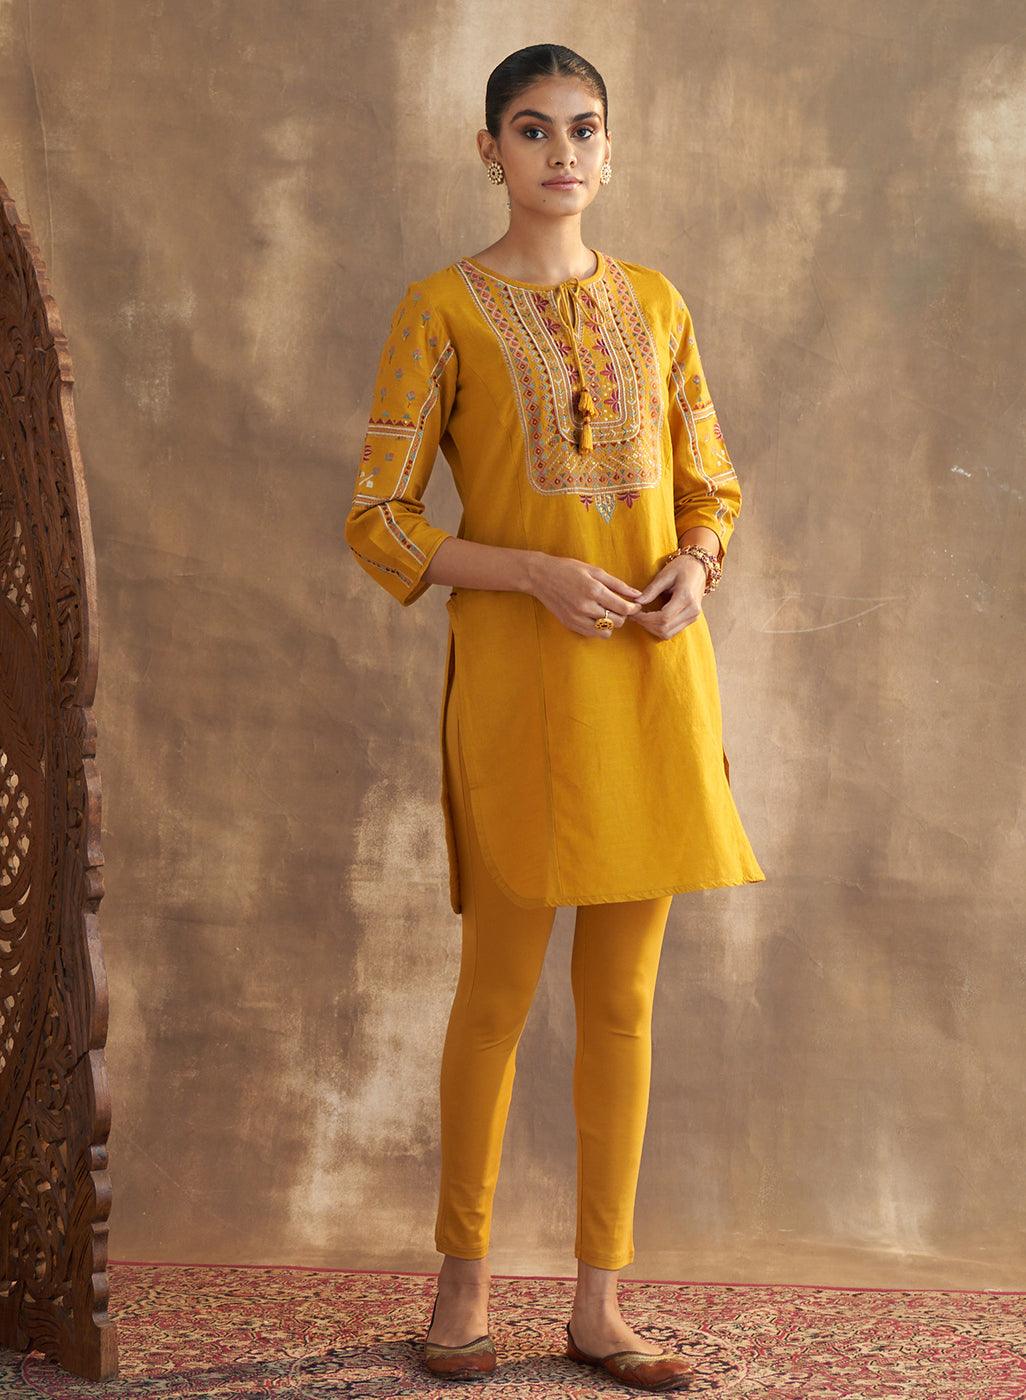 The elegant #red #anarkali paired up with a mango #yellow dupatta | Tenue  indienne, Tenue, Indien